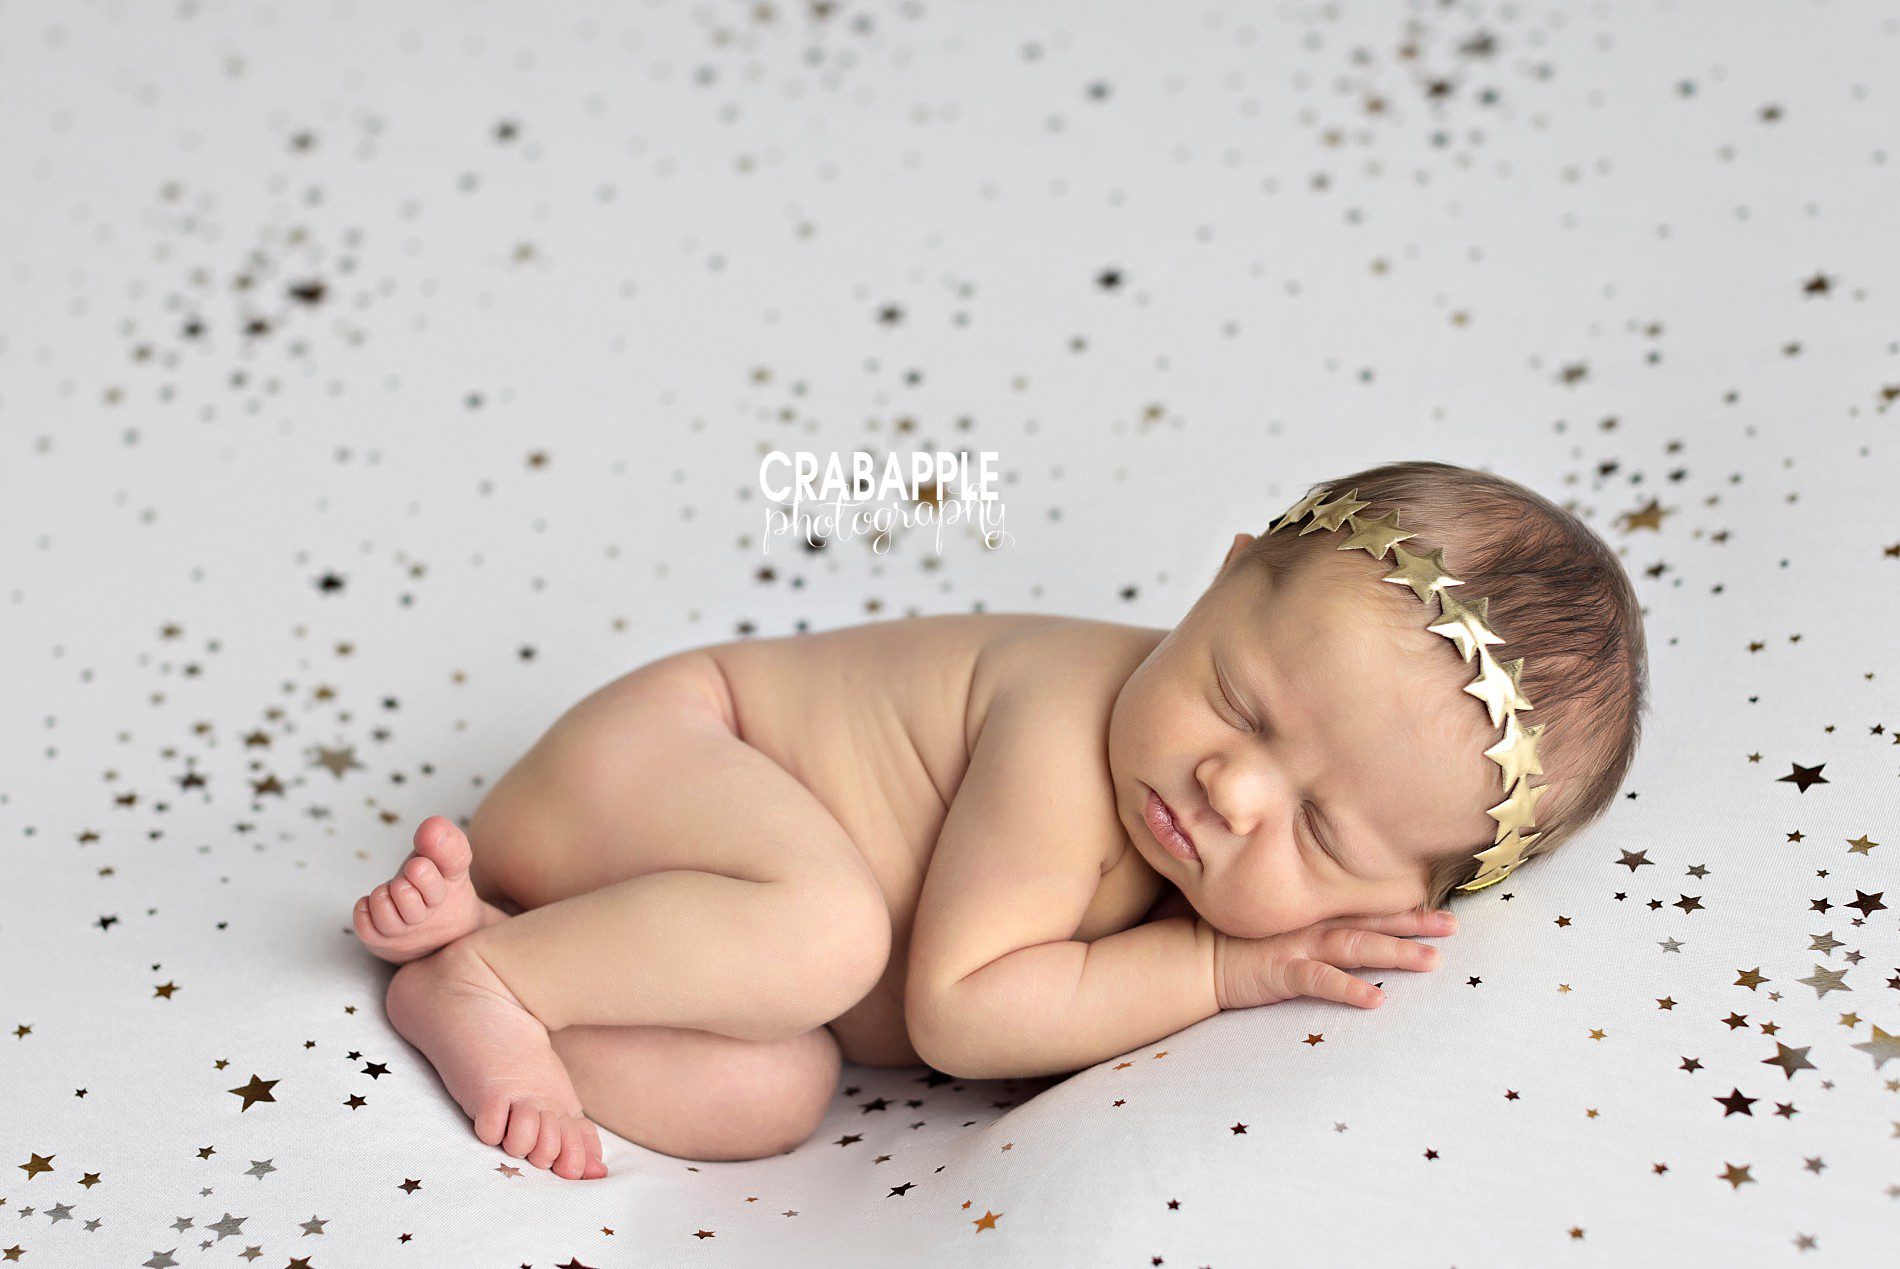 star themed newborn pictures for girls with blanket and headband